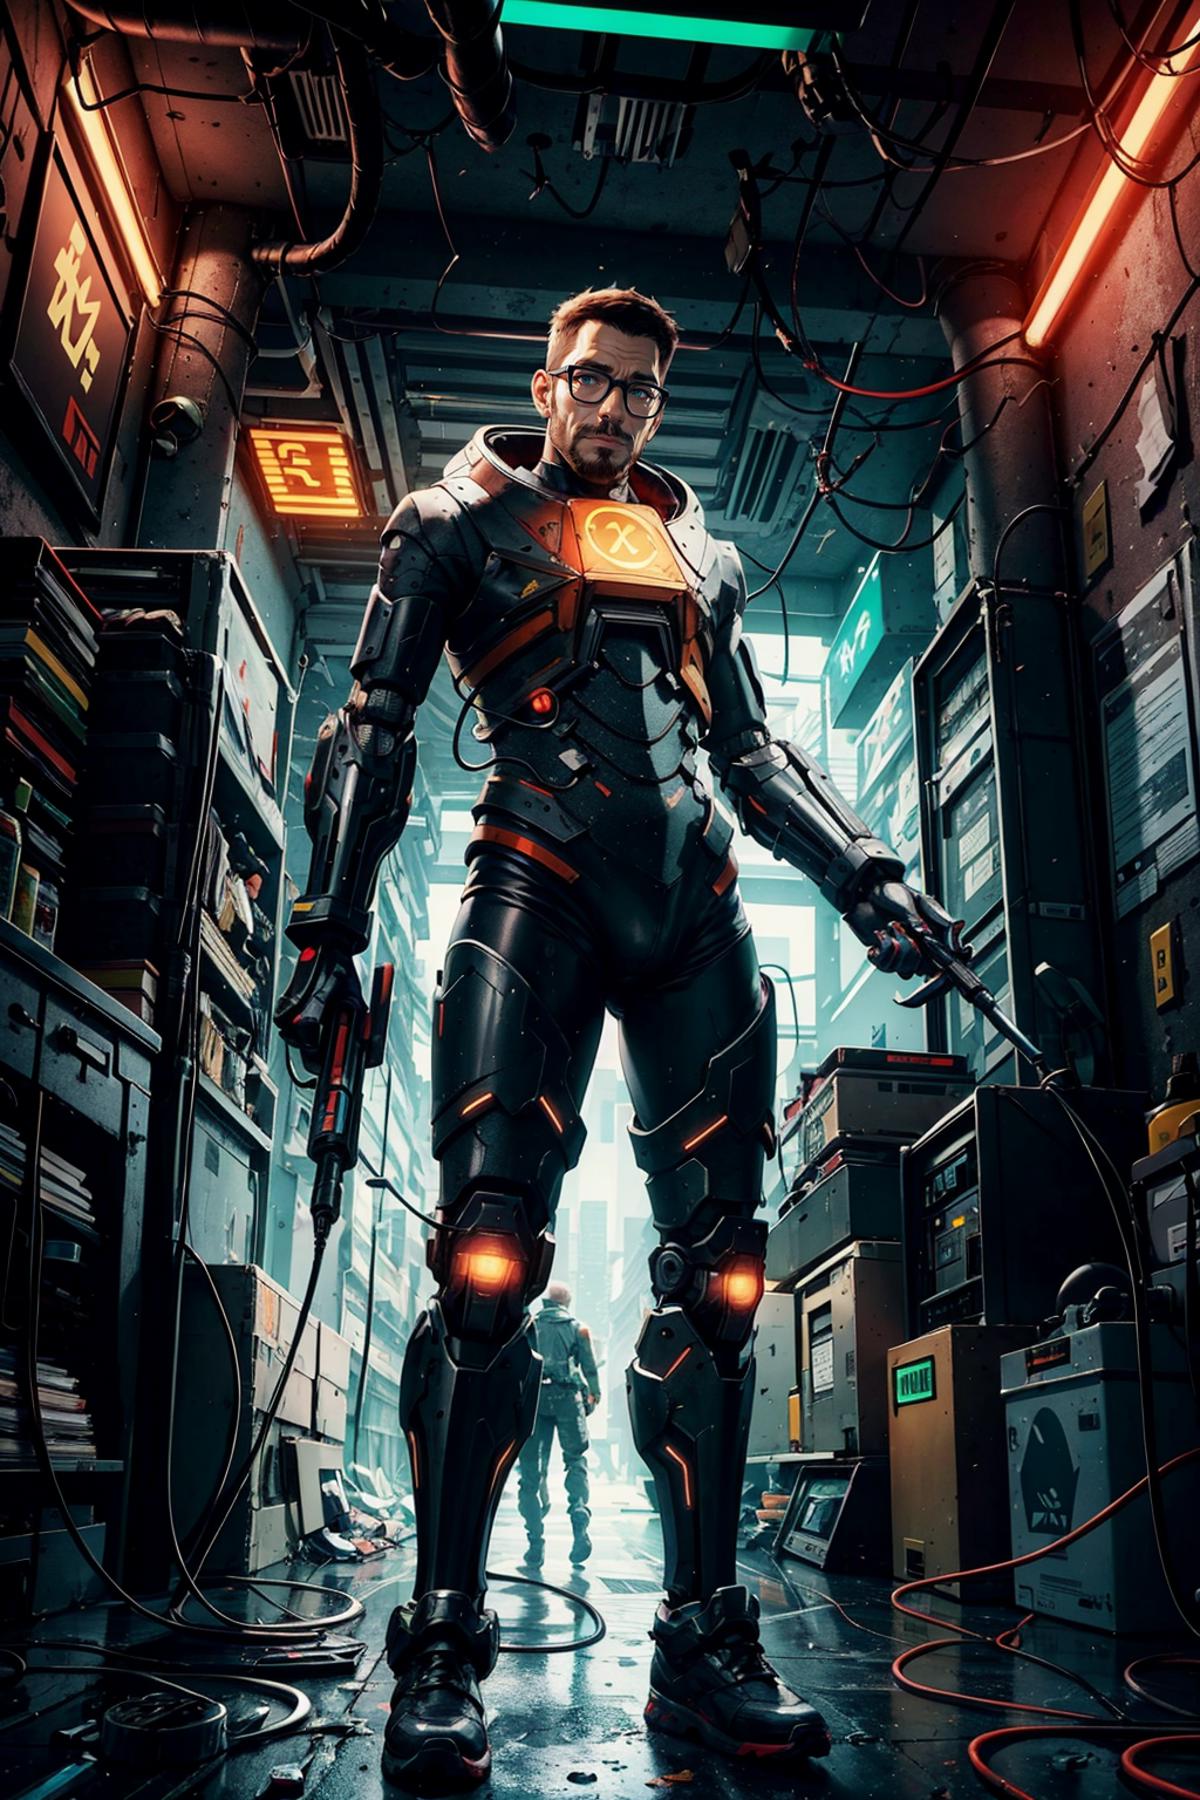 A man in a futuristic suit with a gun in his hand, surrounded by a maze of gadgets and equipment.